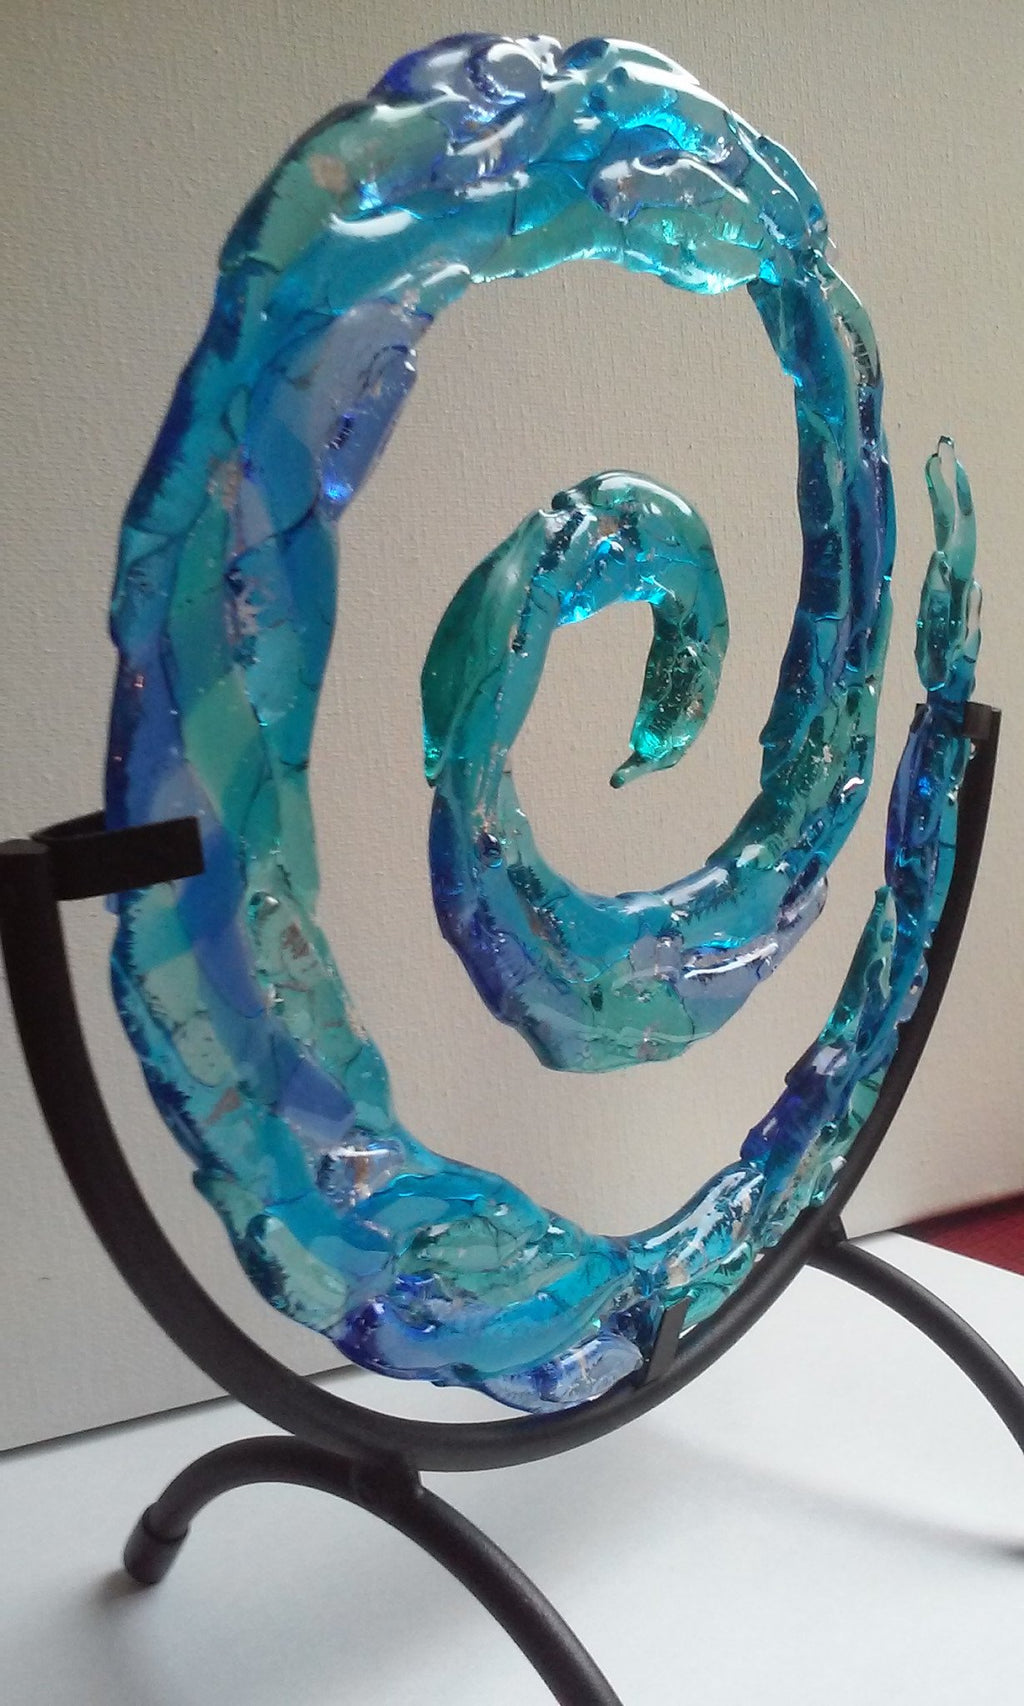 Ashes in Glass 3d Spiral of life in a 10 inch stand ashes infused glass cremation memorial urn by infusion glass